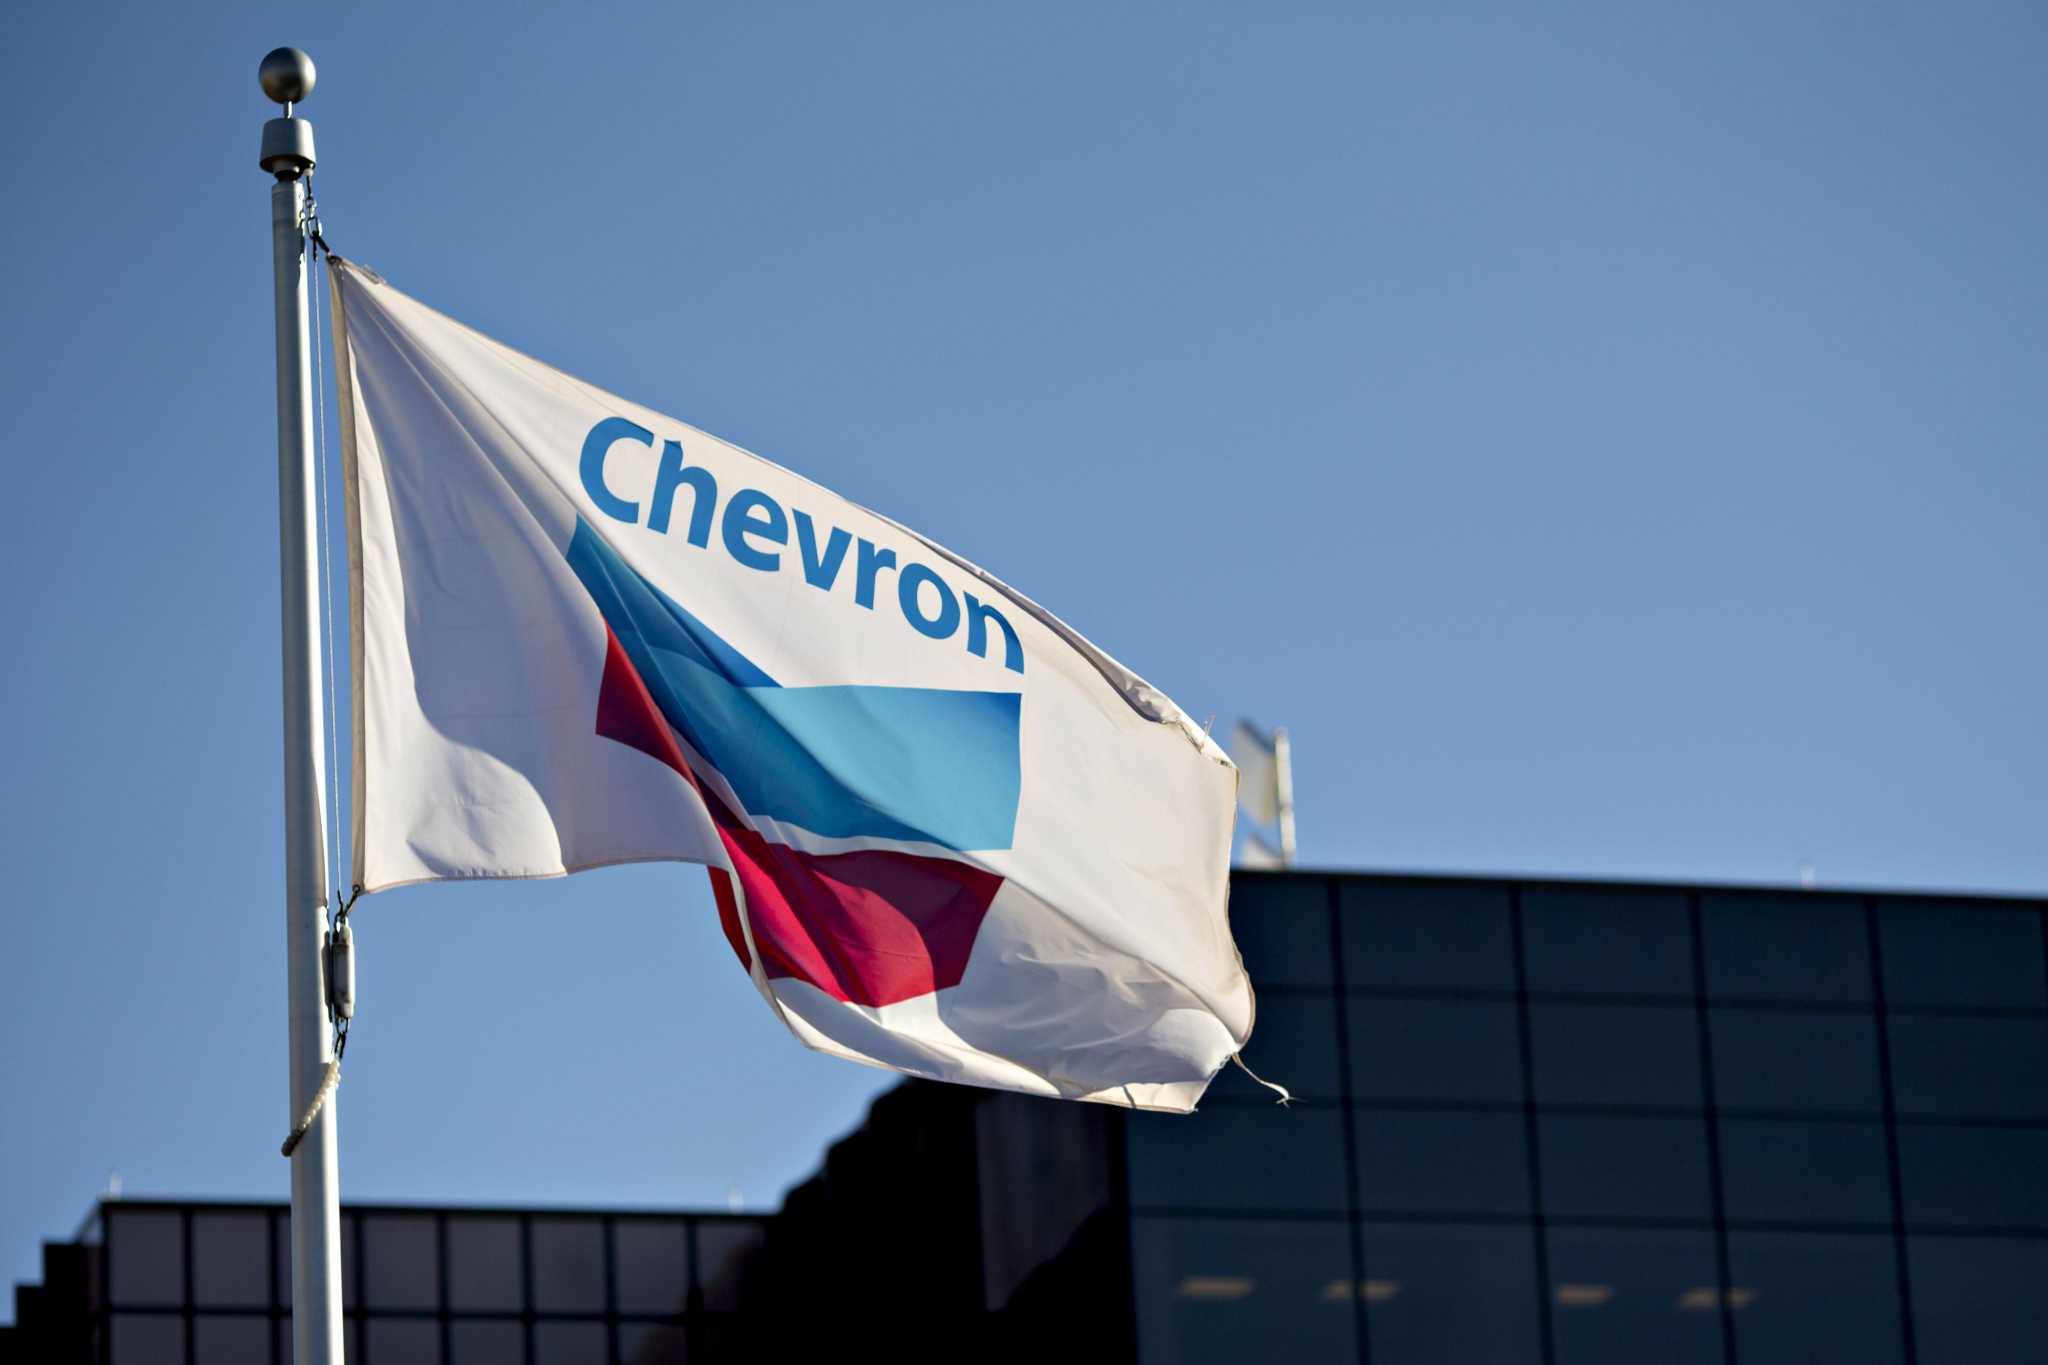 A Chevron Corp. flag flies outside an office building in Midland, Texas, U.S., on Thursday, March 1, 2018. Chevron, the world's third-largest publicly traded oil producer, is spending $3.3 billion this year in the Permian and an additional $1 billion in other shale basins. Its expansion will further bolster U.S. oil output, which already exceeds 10 million barrels a day, surpassing the record set in 1970. Photographer: Daniel Acker/Bloomberg